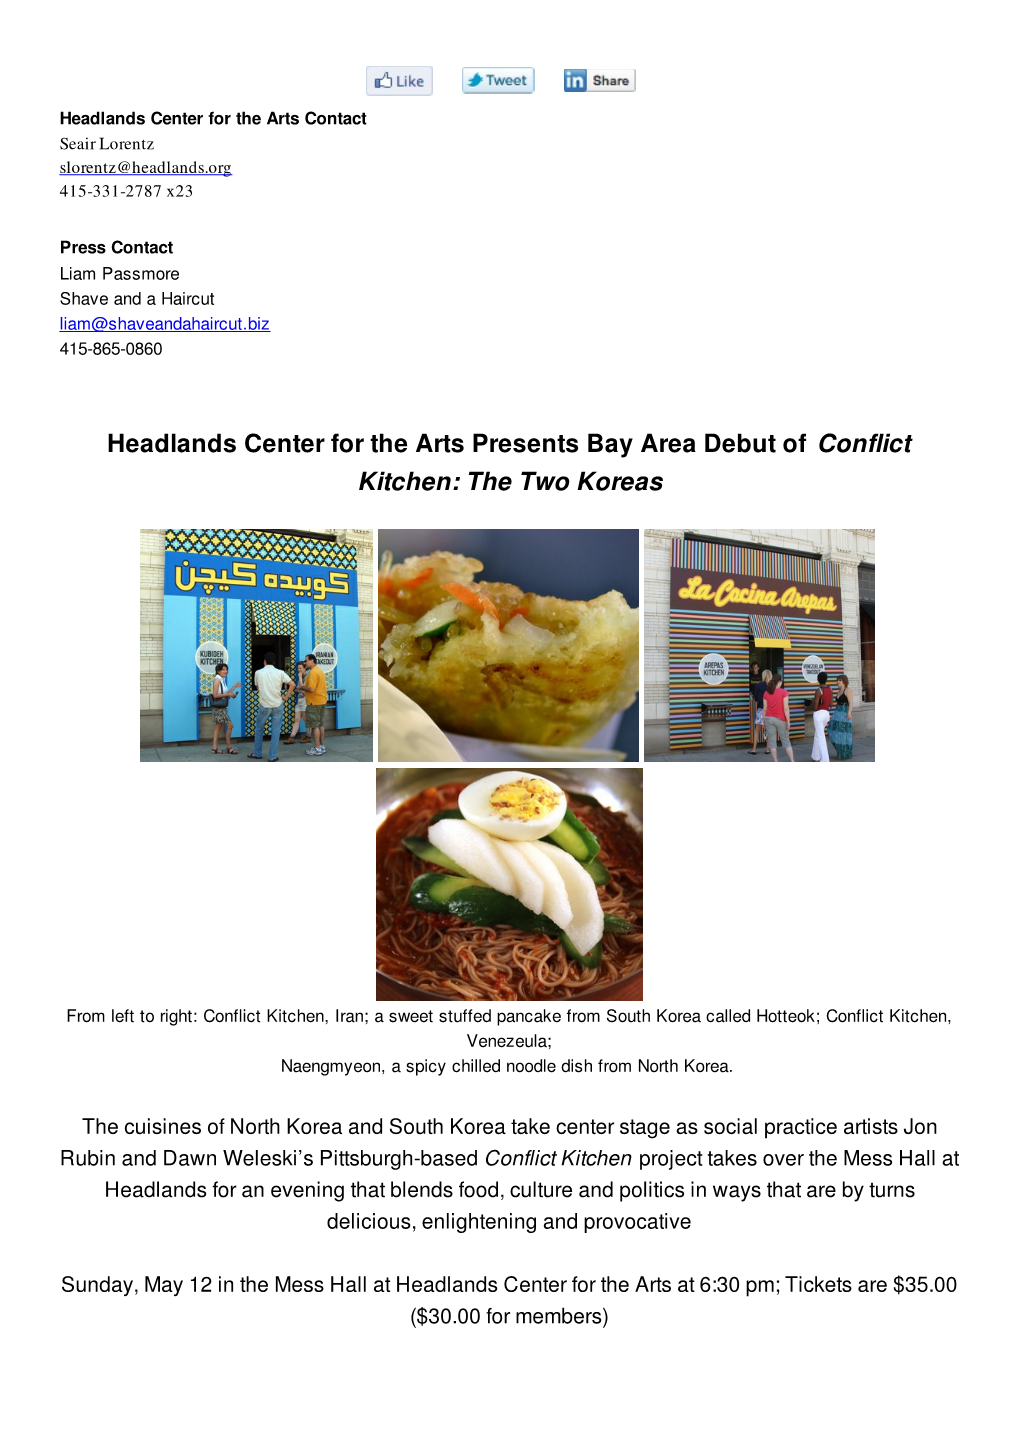 Headlands Center for the Arts Presents Bay Area Debut of Conflict Kitchen: the Two Koreas